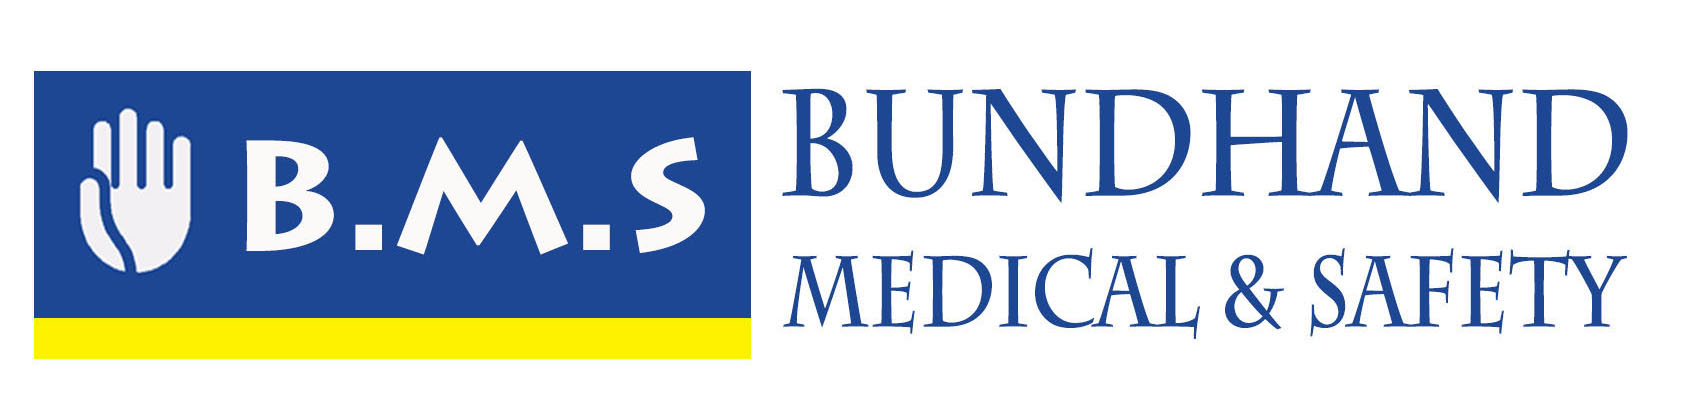 Bundhand Medical and Safety Products Company Limited